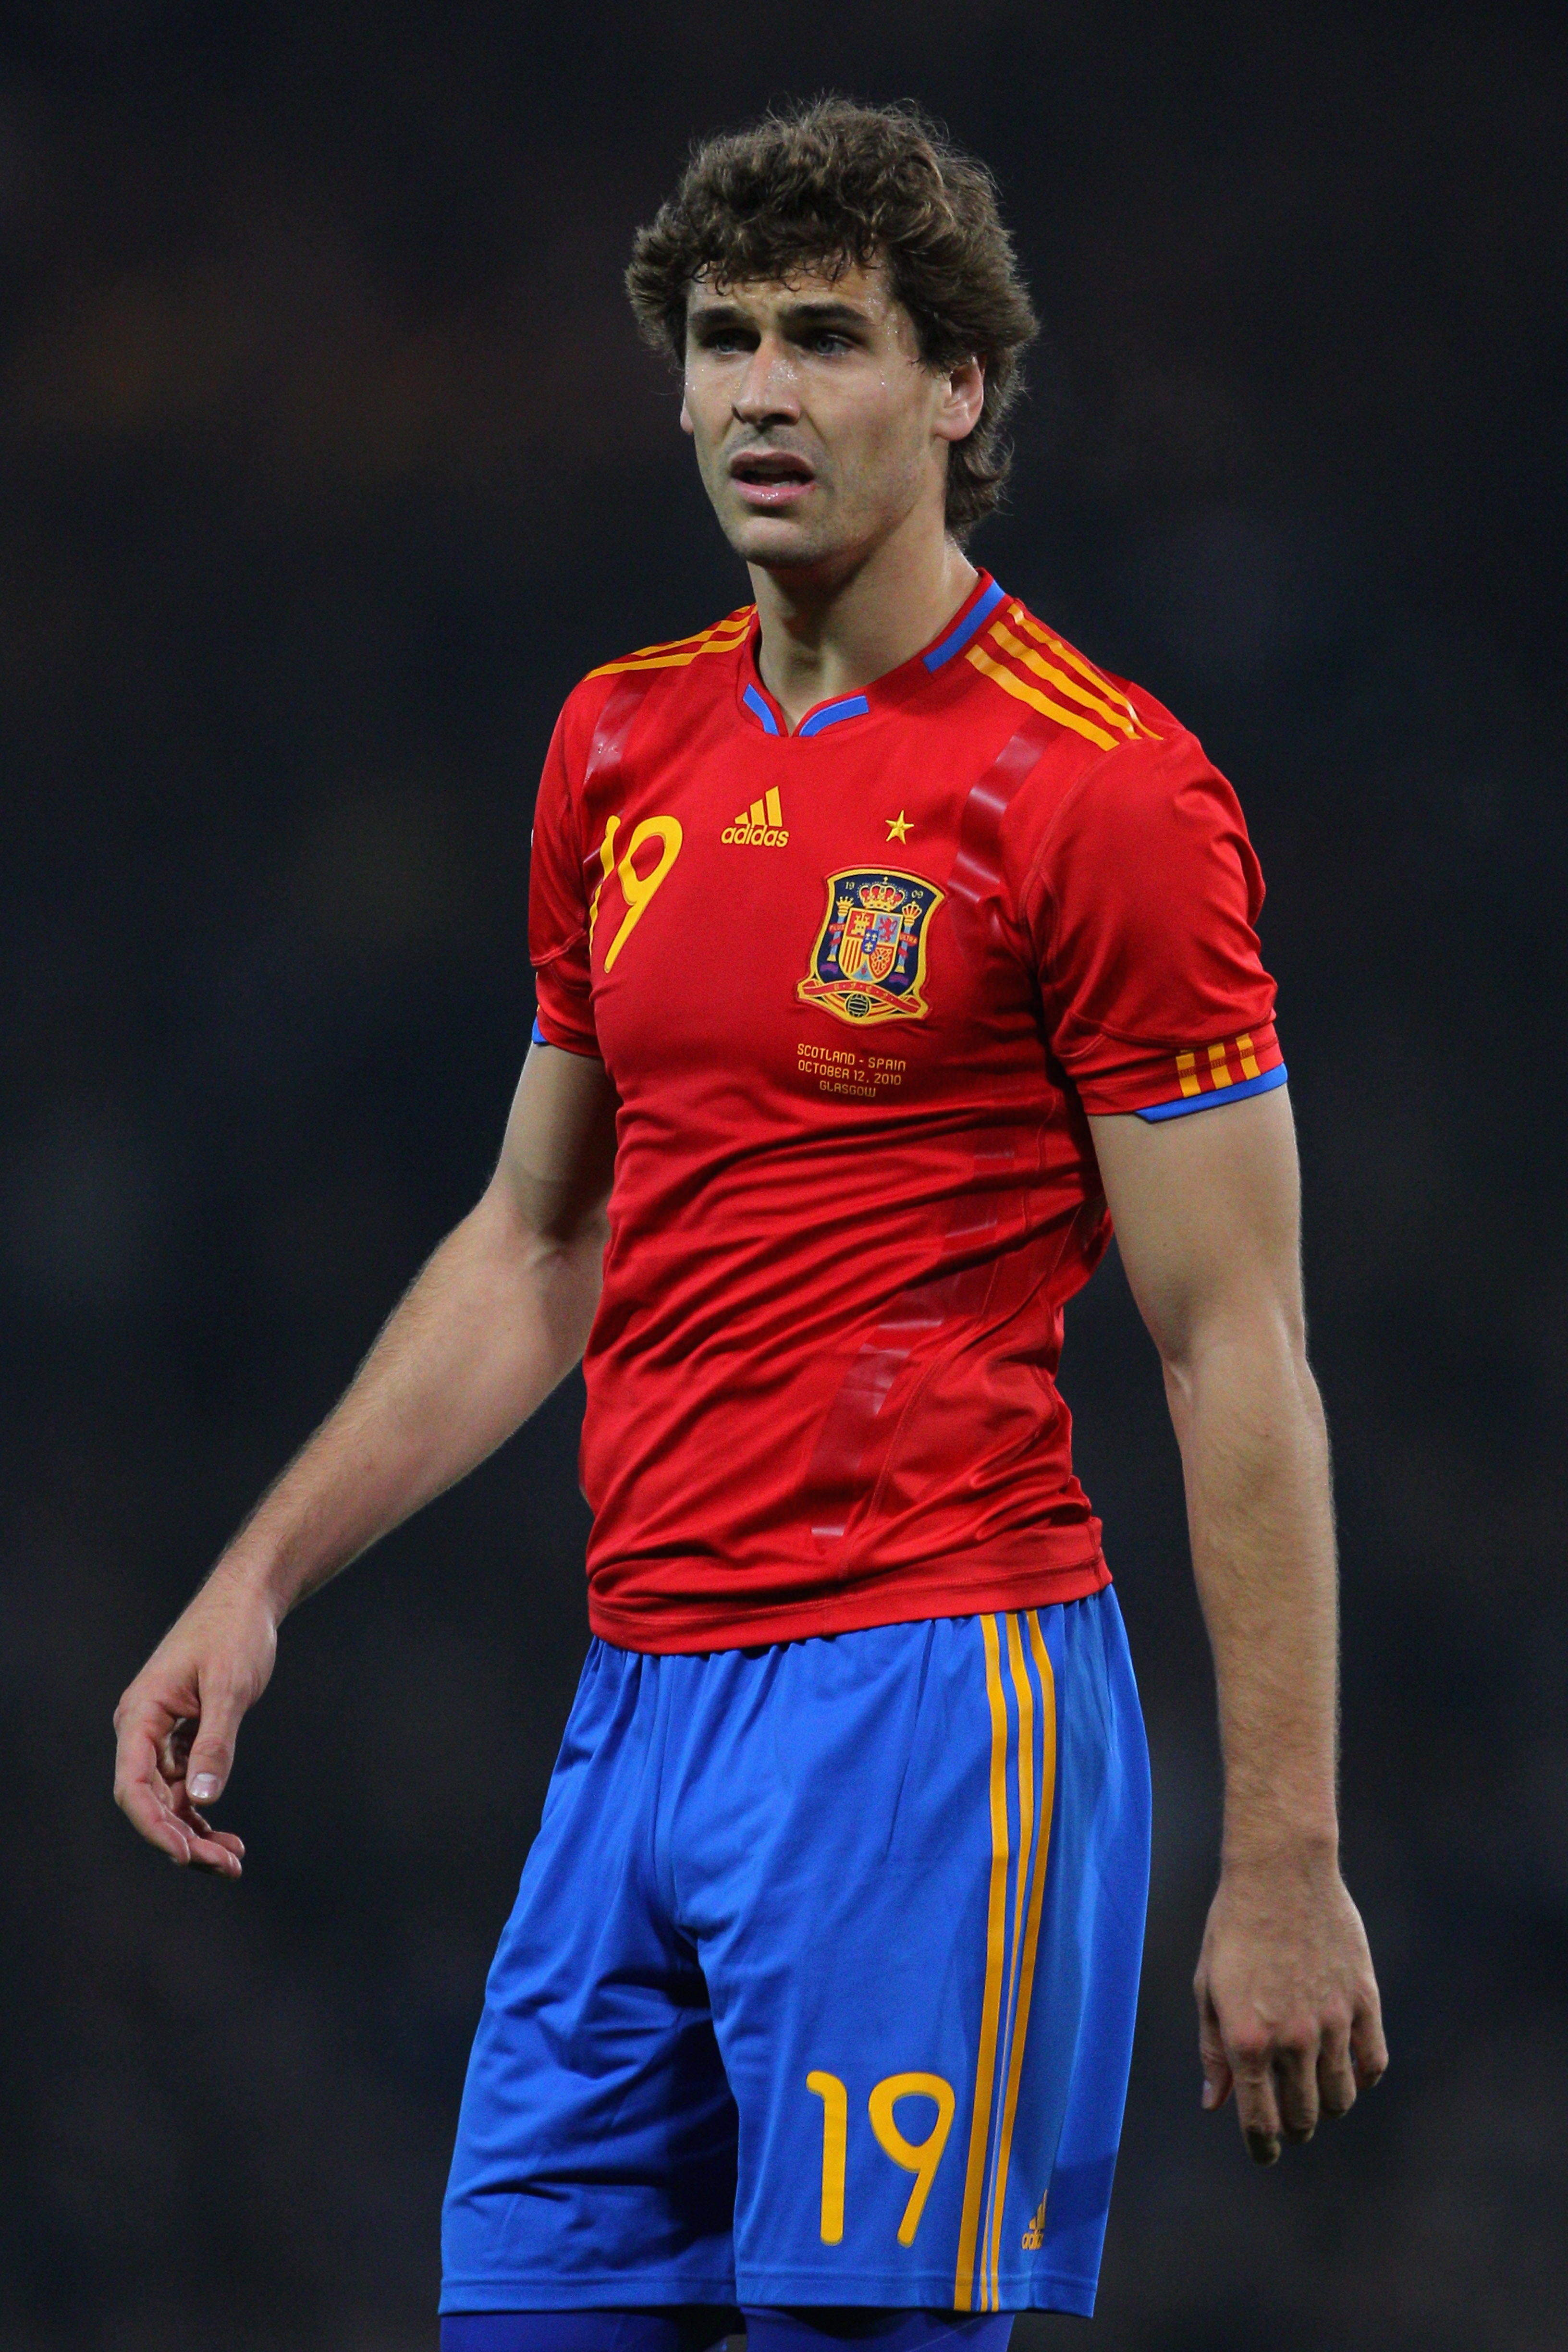 GLASGOW, SCOTLAND - OCTOBER 12:  Fernando Llorento of Spain during the UEFA EURO 2012 Group I qualifying match between Scotland and Spain at Hampden Park on October 12, 2010 in Glasgow, Scotland.  (Photo by Clive Rose/Getty Images)